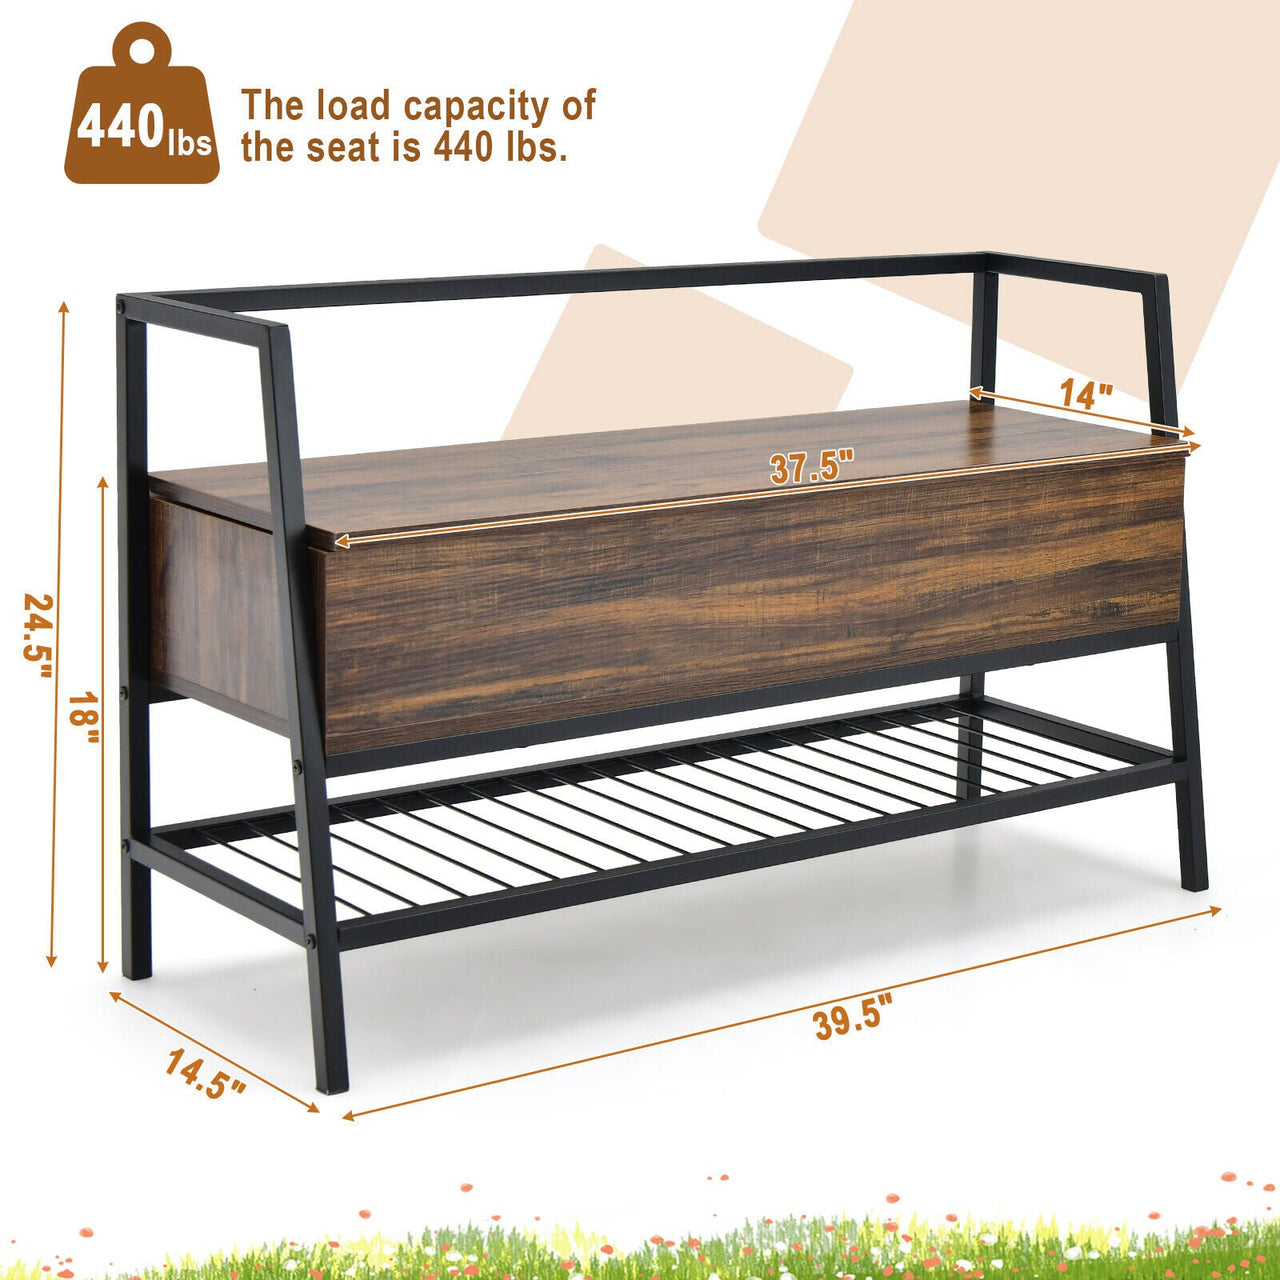 Industrial Shoe Bench with Storage Space and Metal Handrail